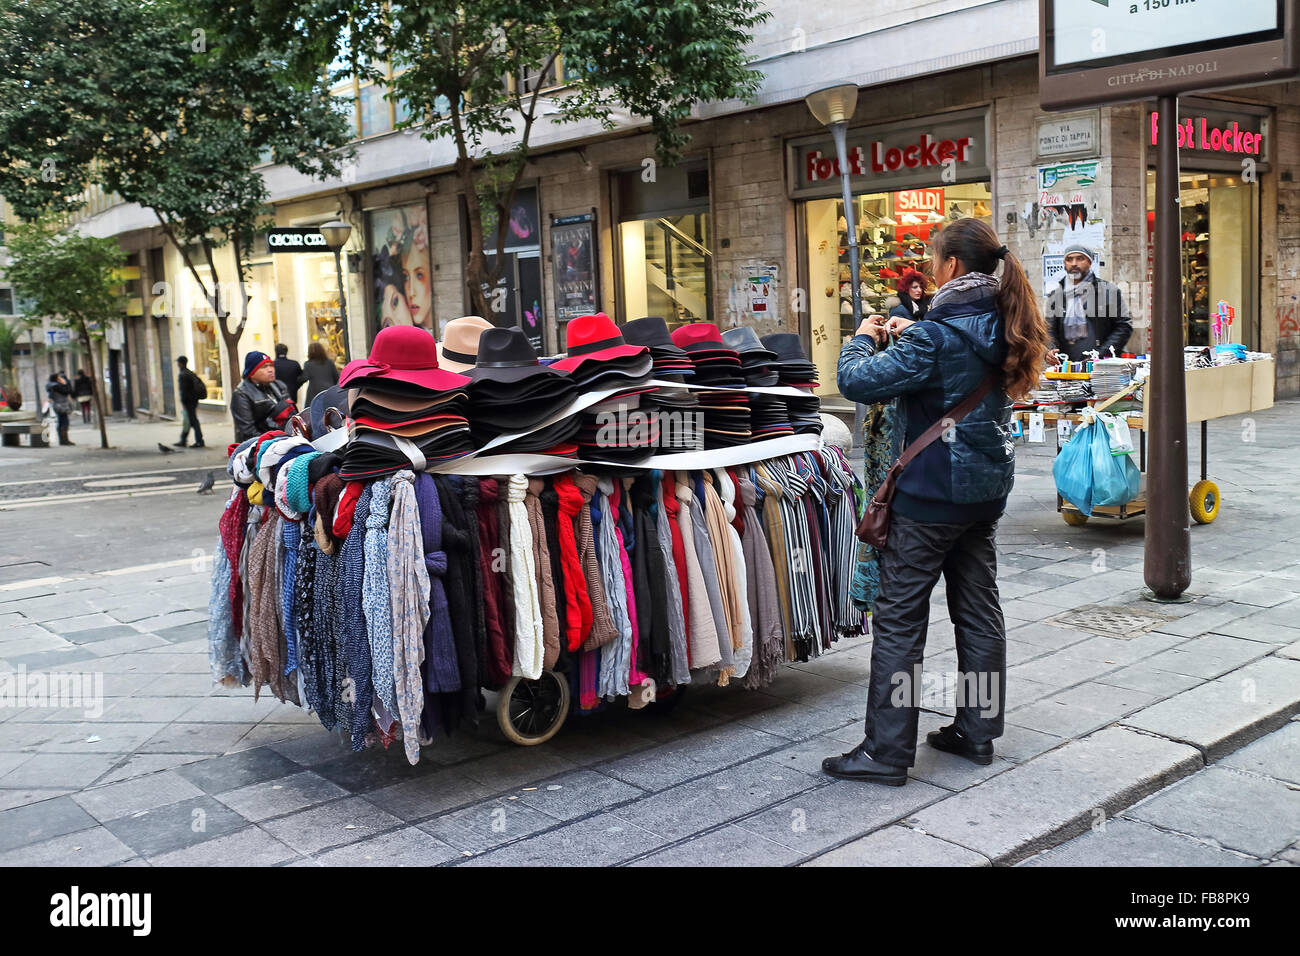 Naples, Italy - January 6, 2016: in a main street of the historic city center, a street vendor of hats with his cart. Stock Photo